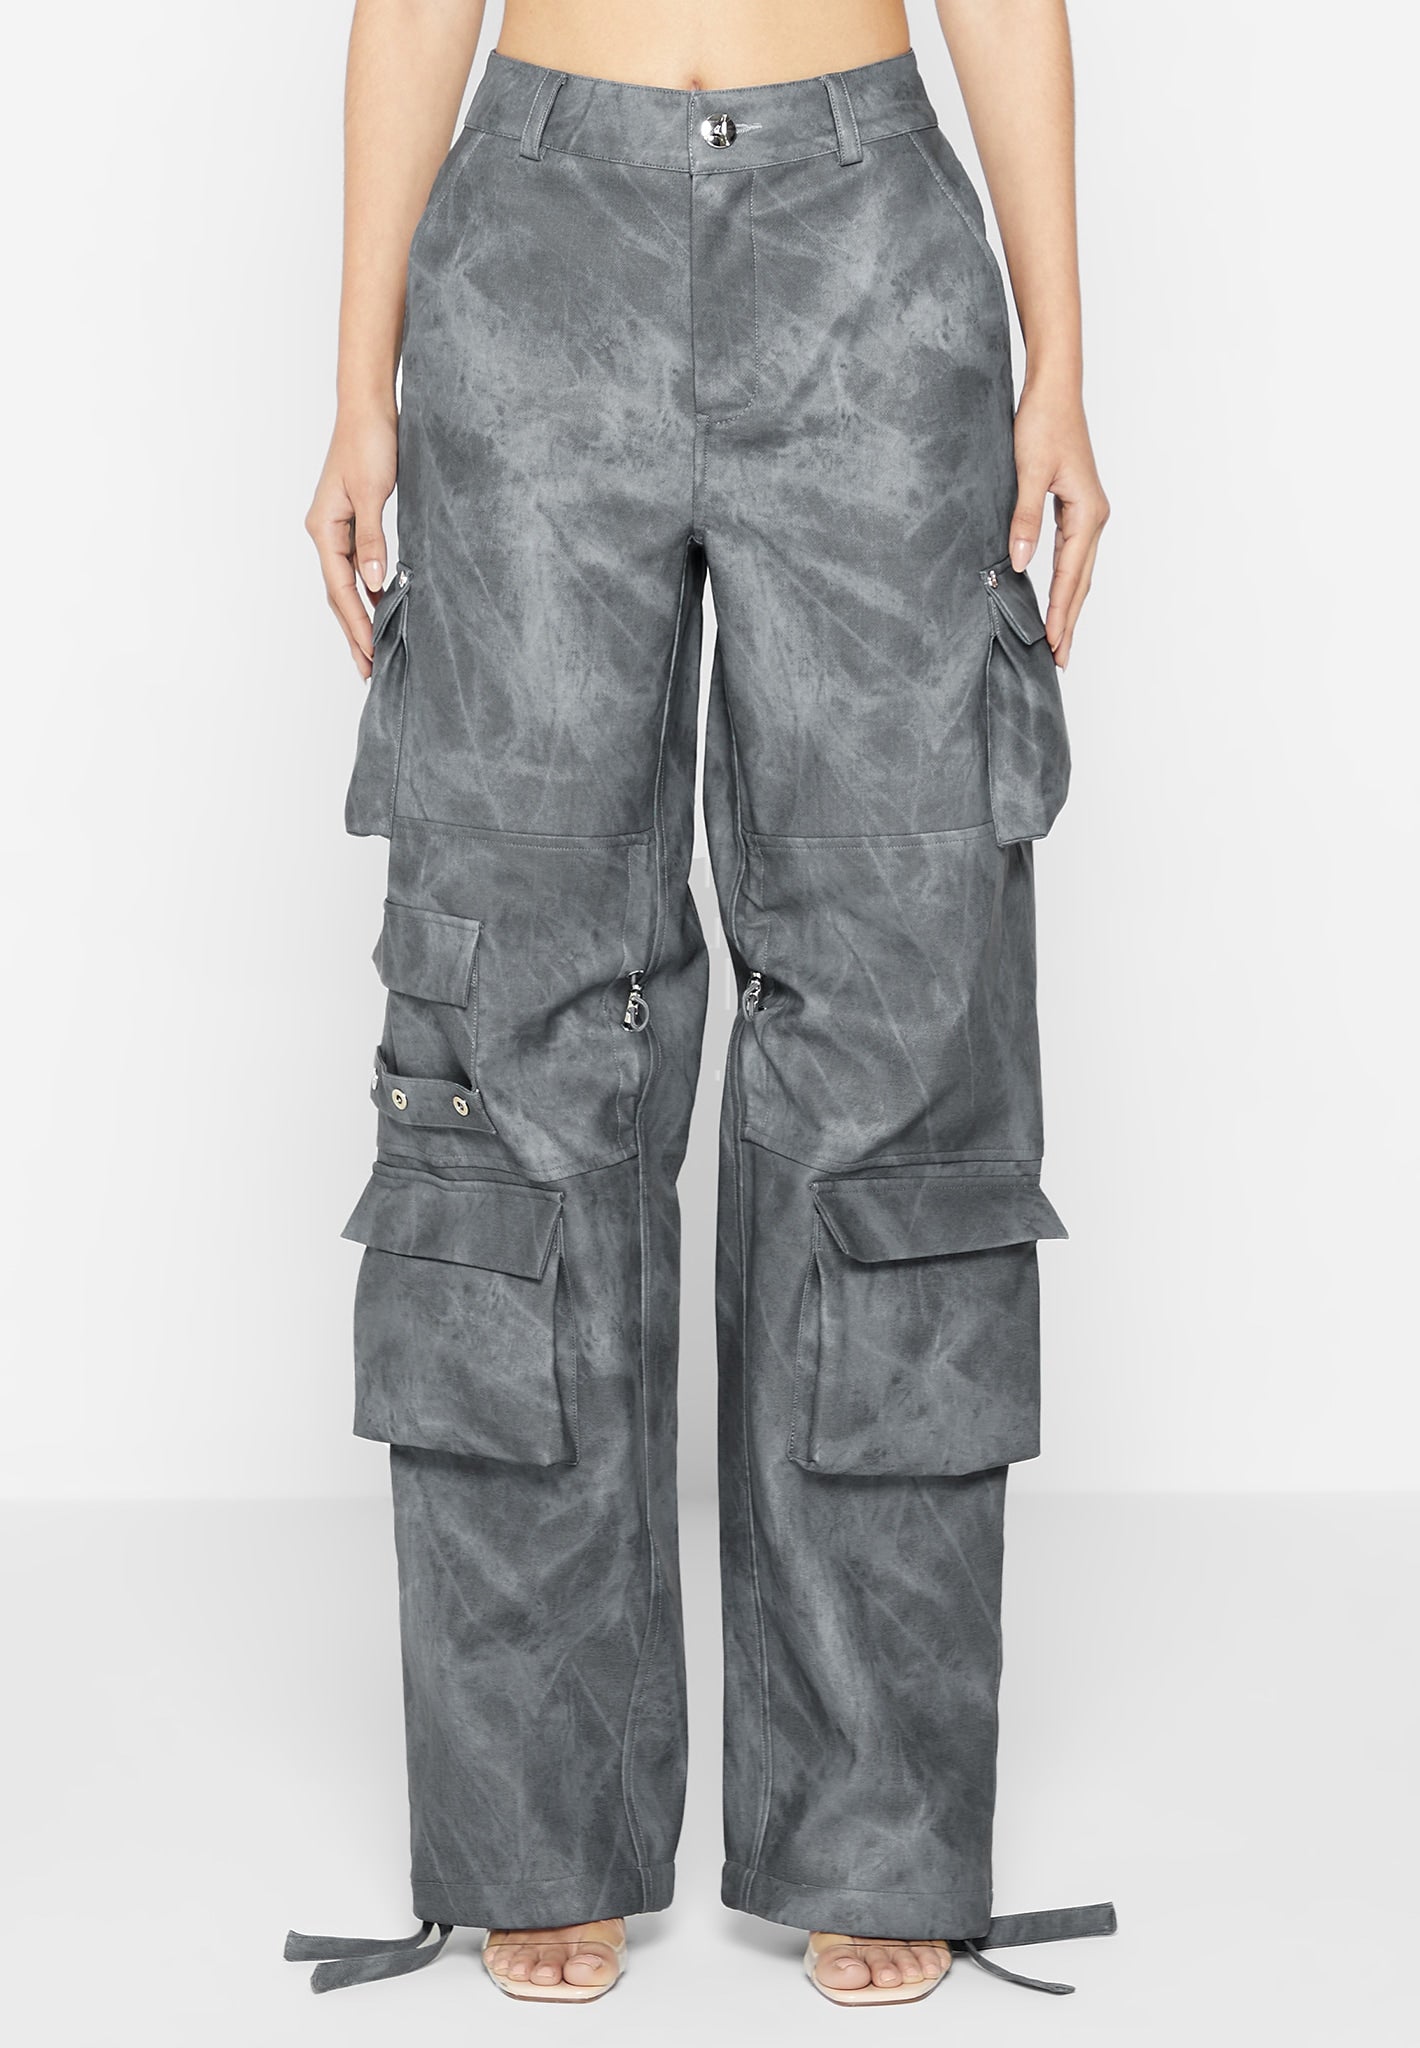 Vintage Marble Leather Cargo Pants - Washed Grey